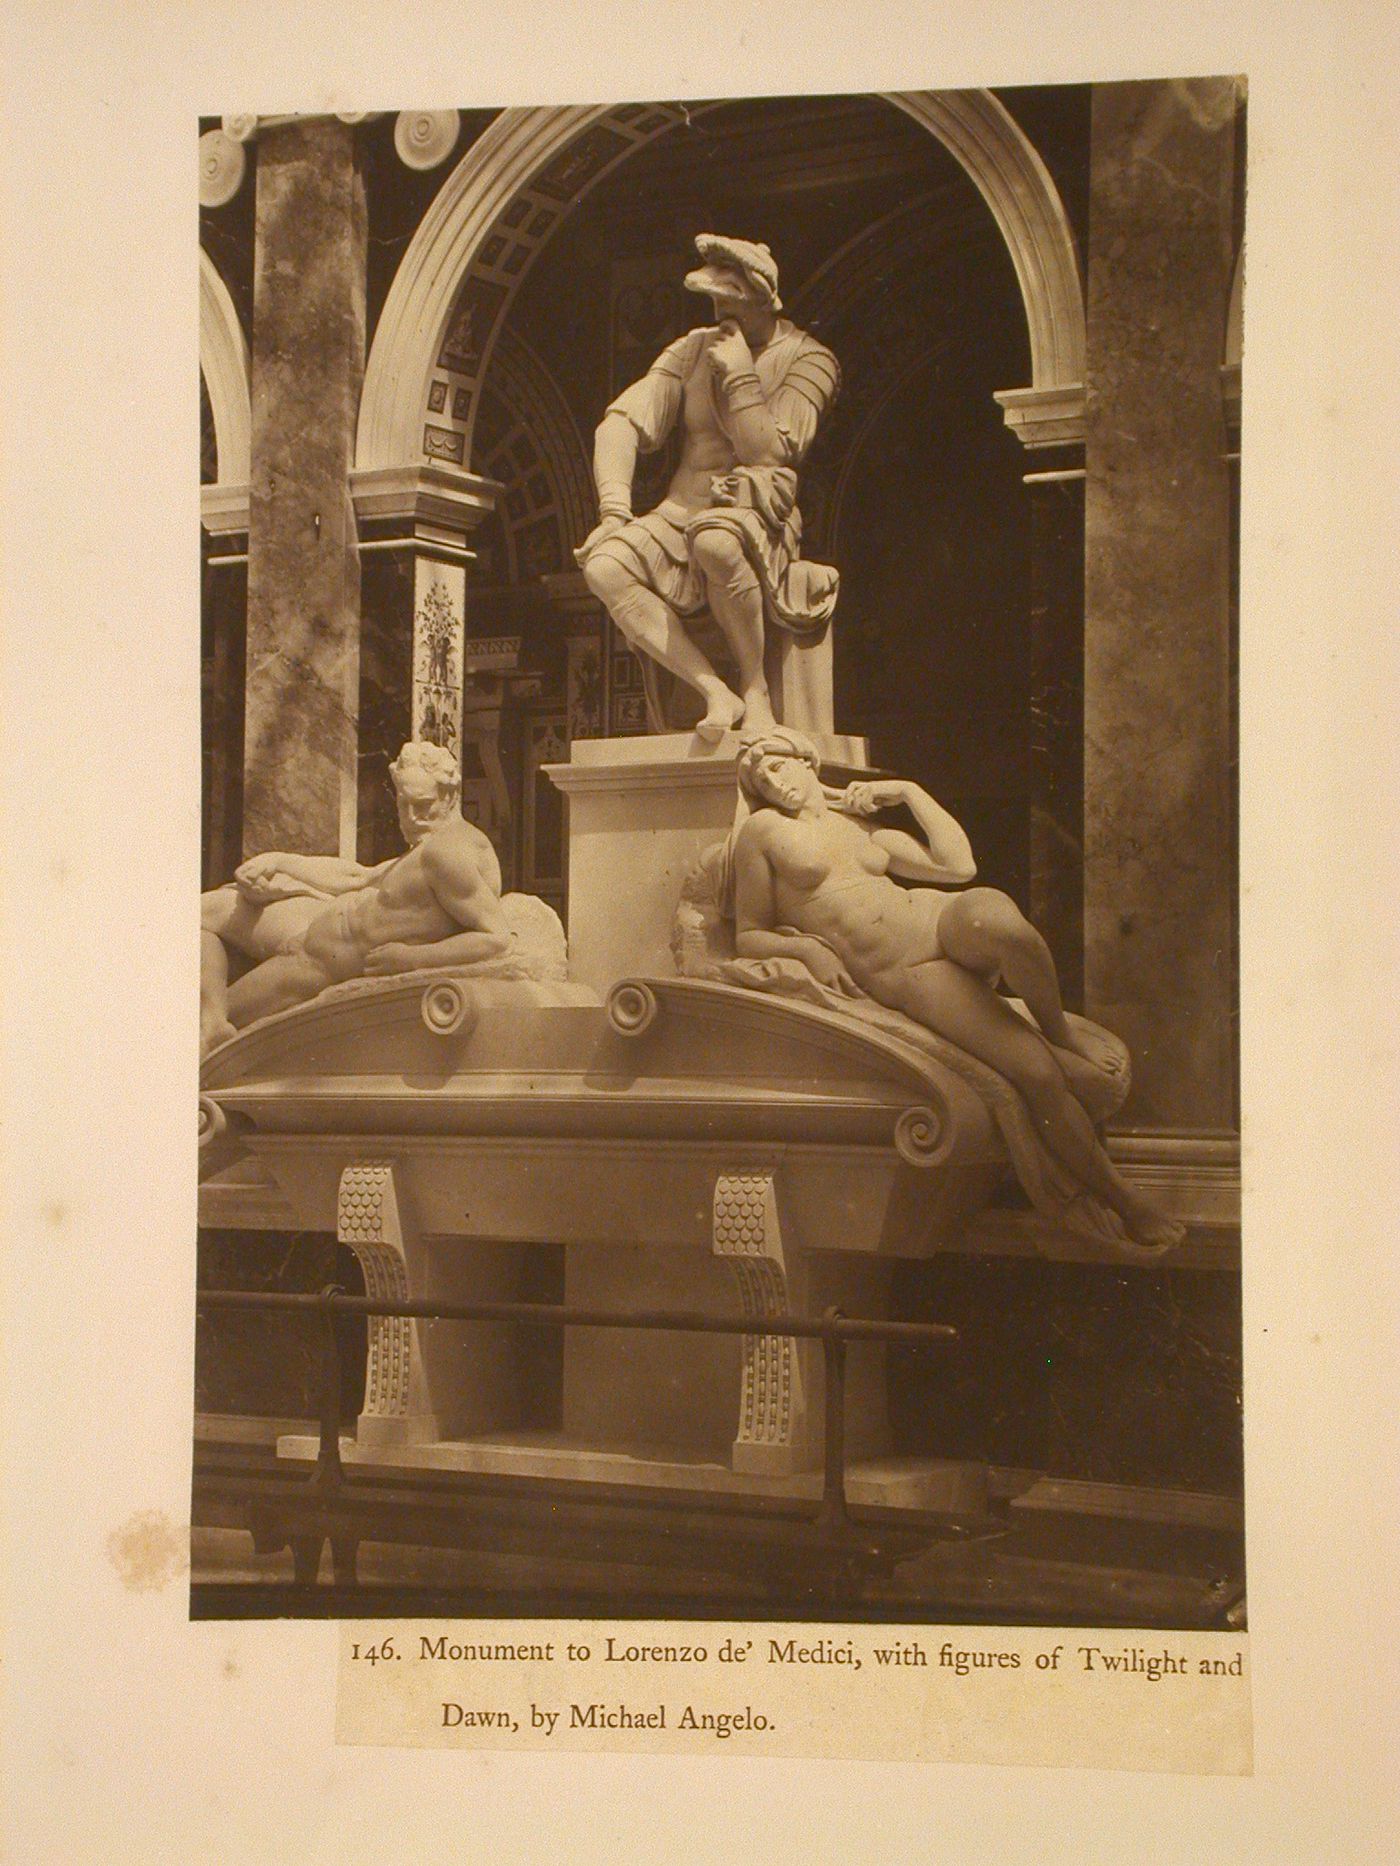 Monument to Lorenzo de' Medici, with figures of Twilight and Dawn, by Michaelangelo, Crystal Palace, Sydenham, England